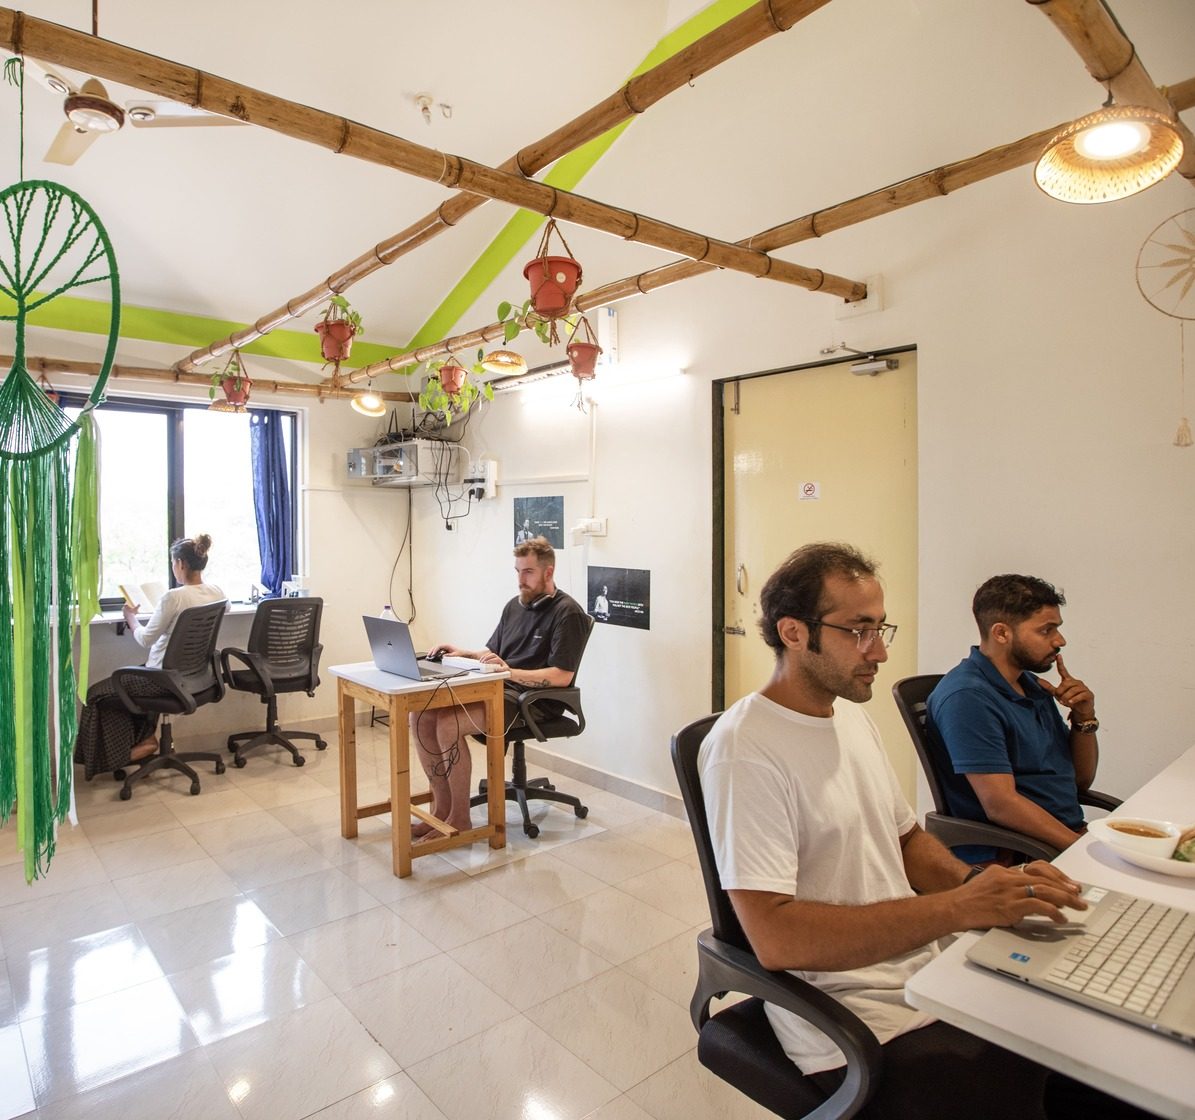 The image shows an indoor coworking space in Goa India